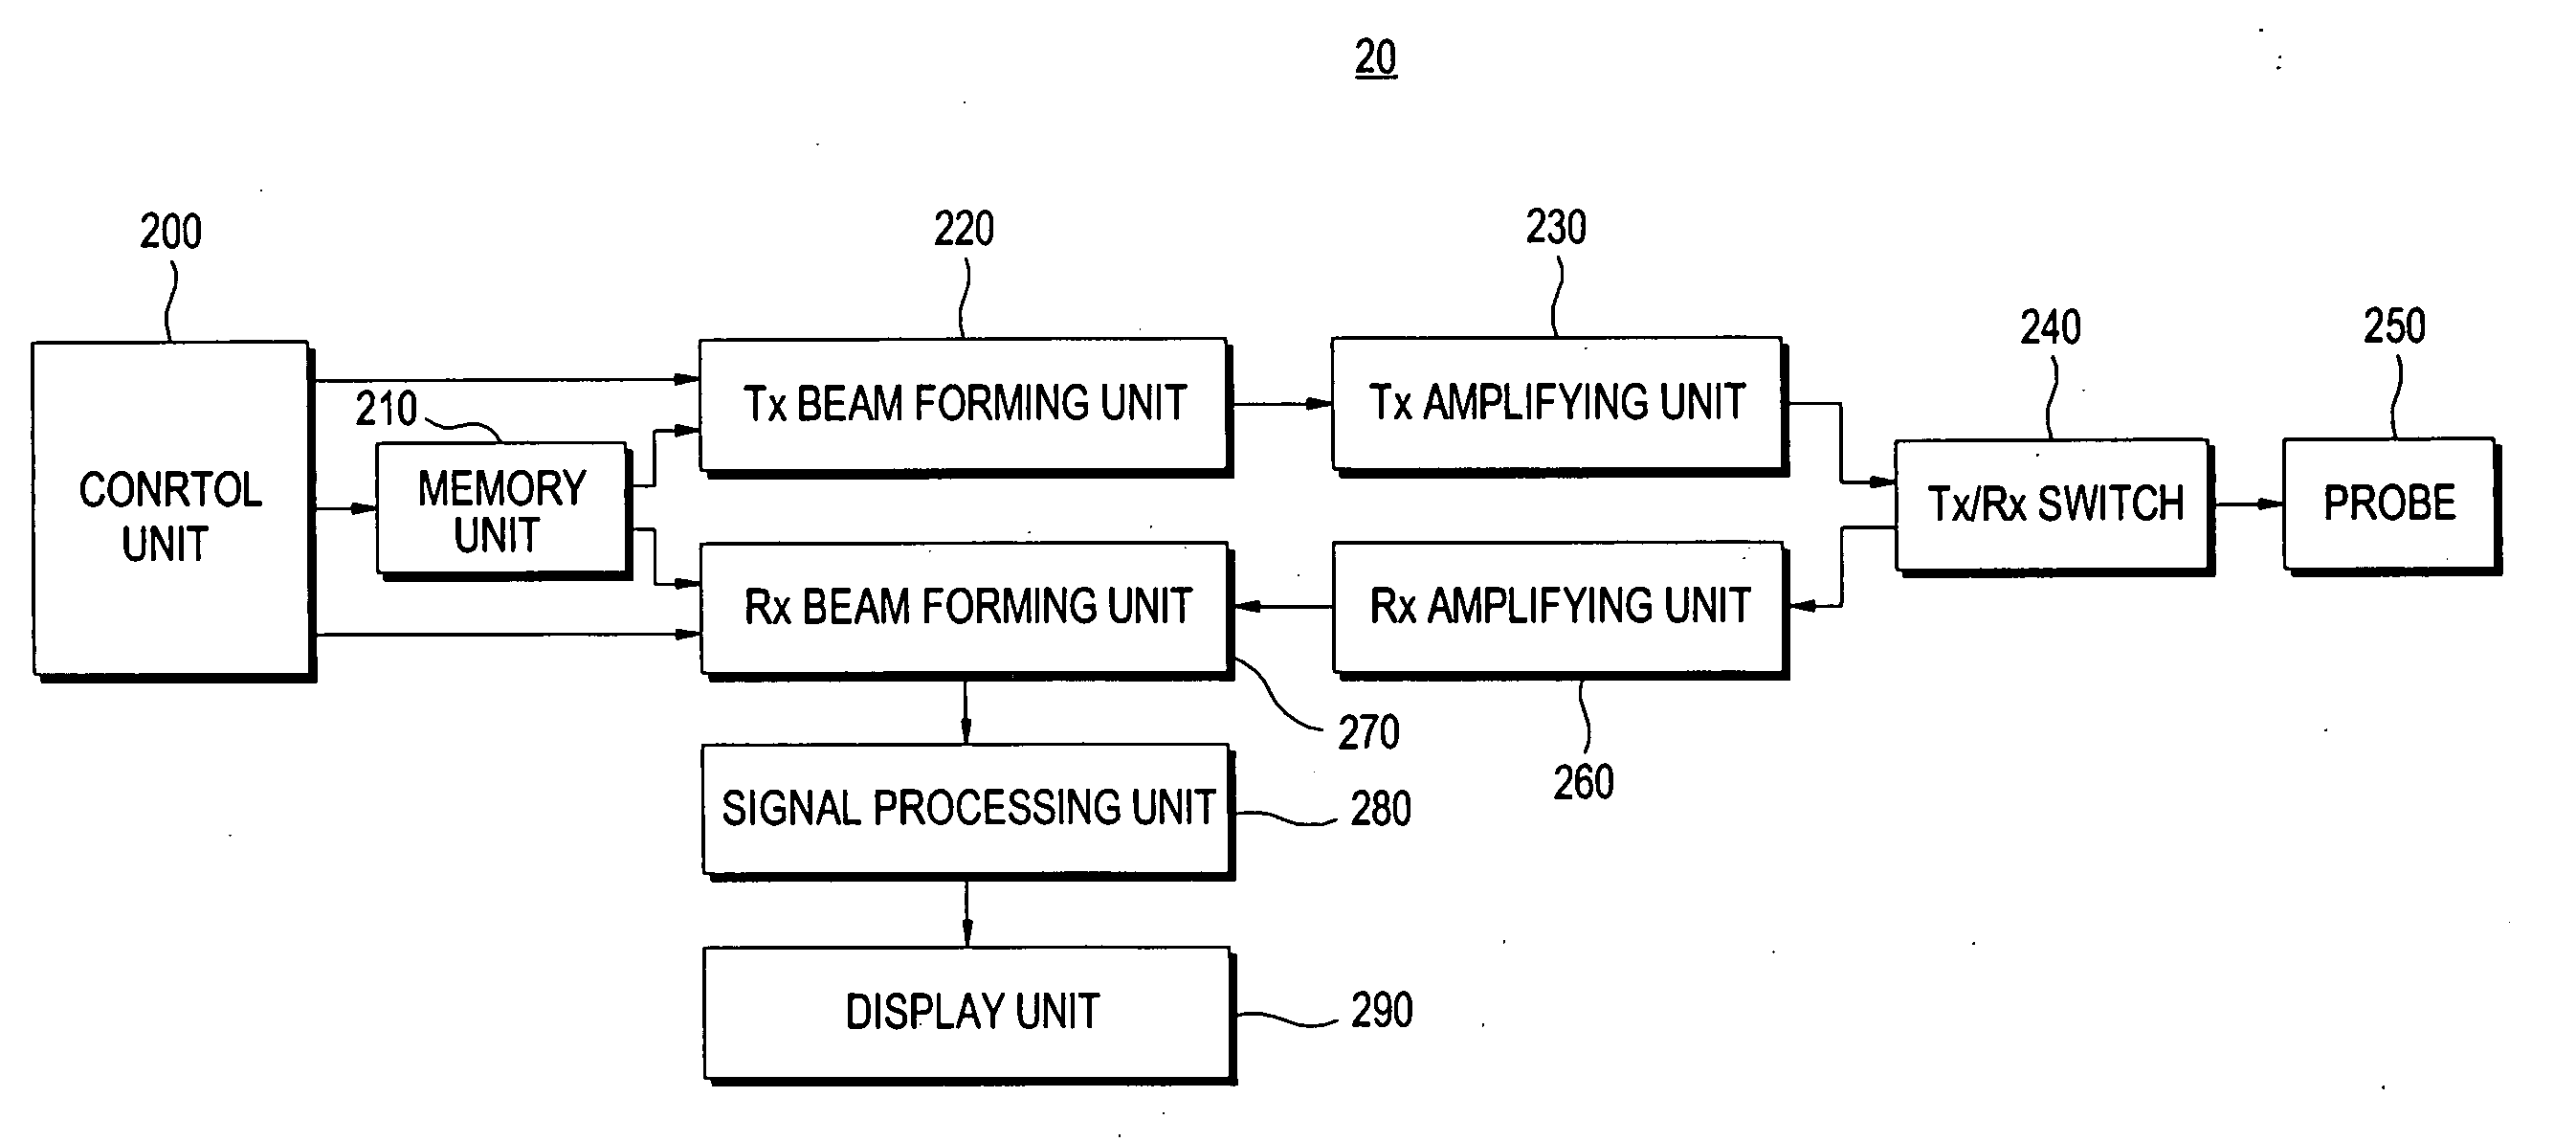 Ultrasound diagnostic system and method of forming Tx and Rx beams by using delay data